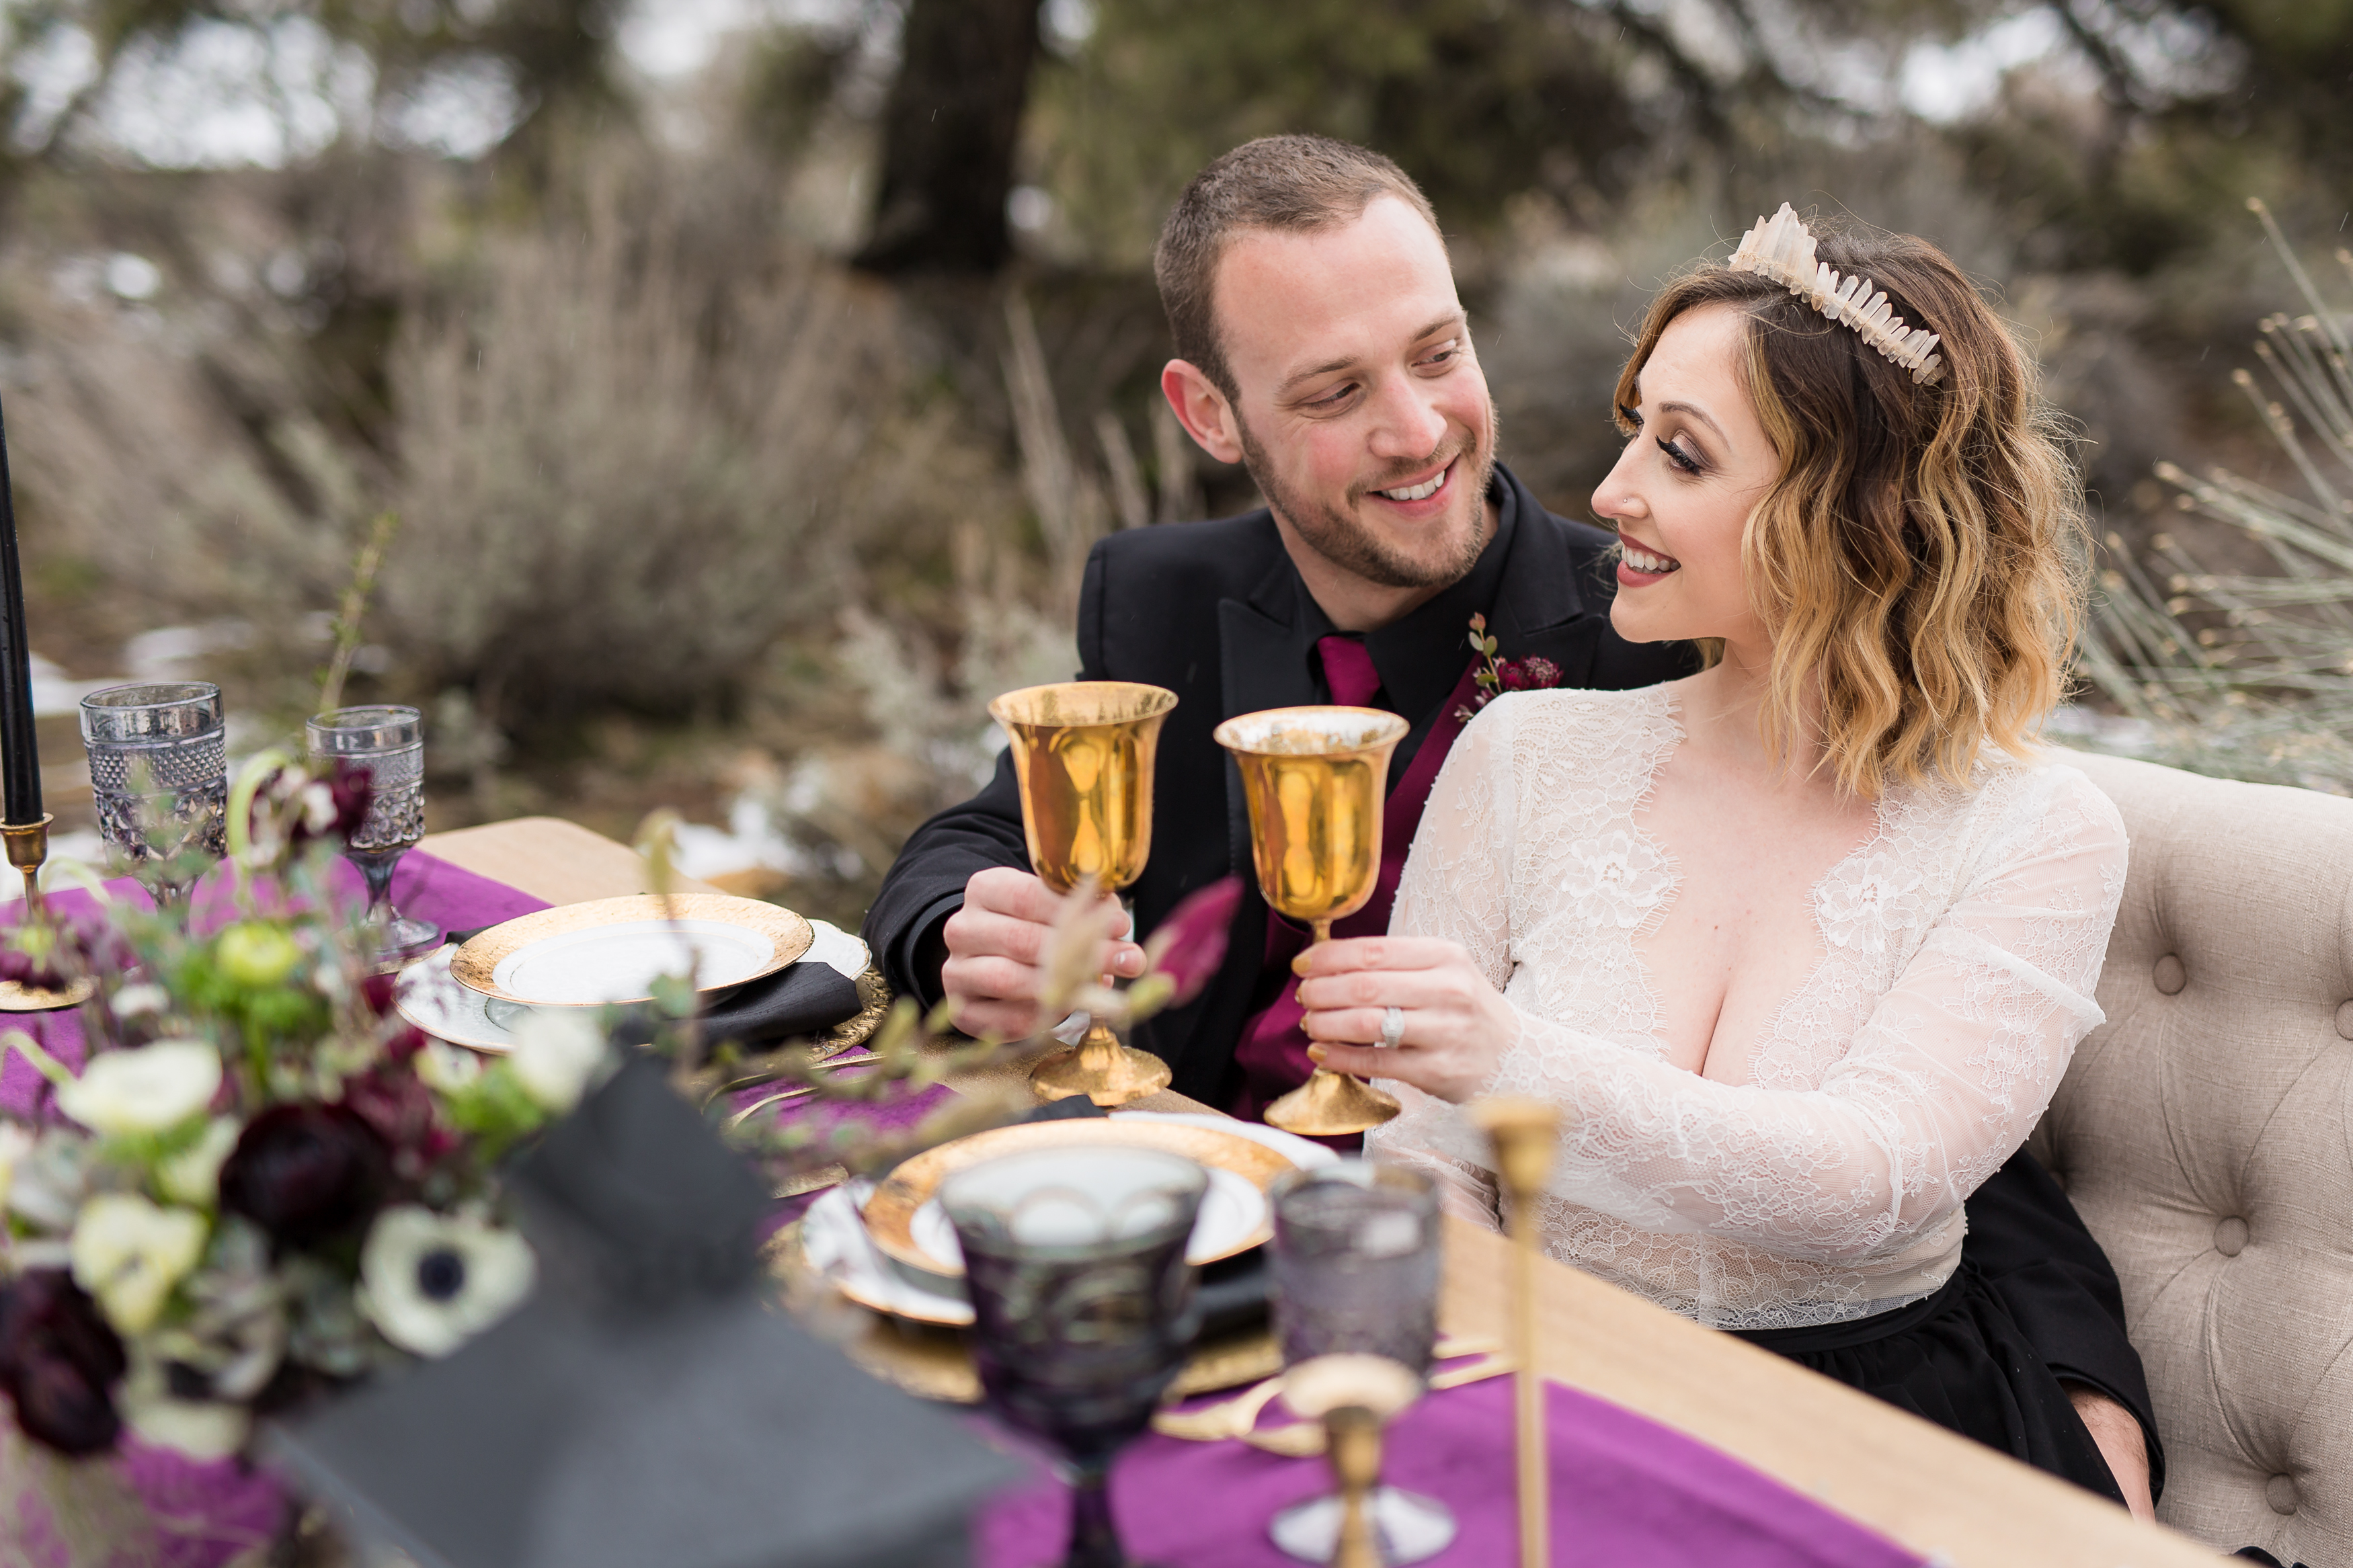 Man and woman toasting at sweetheart table with gold glasses